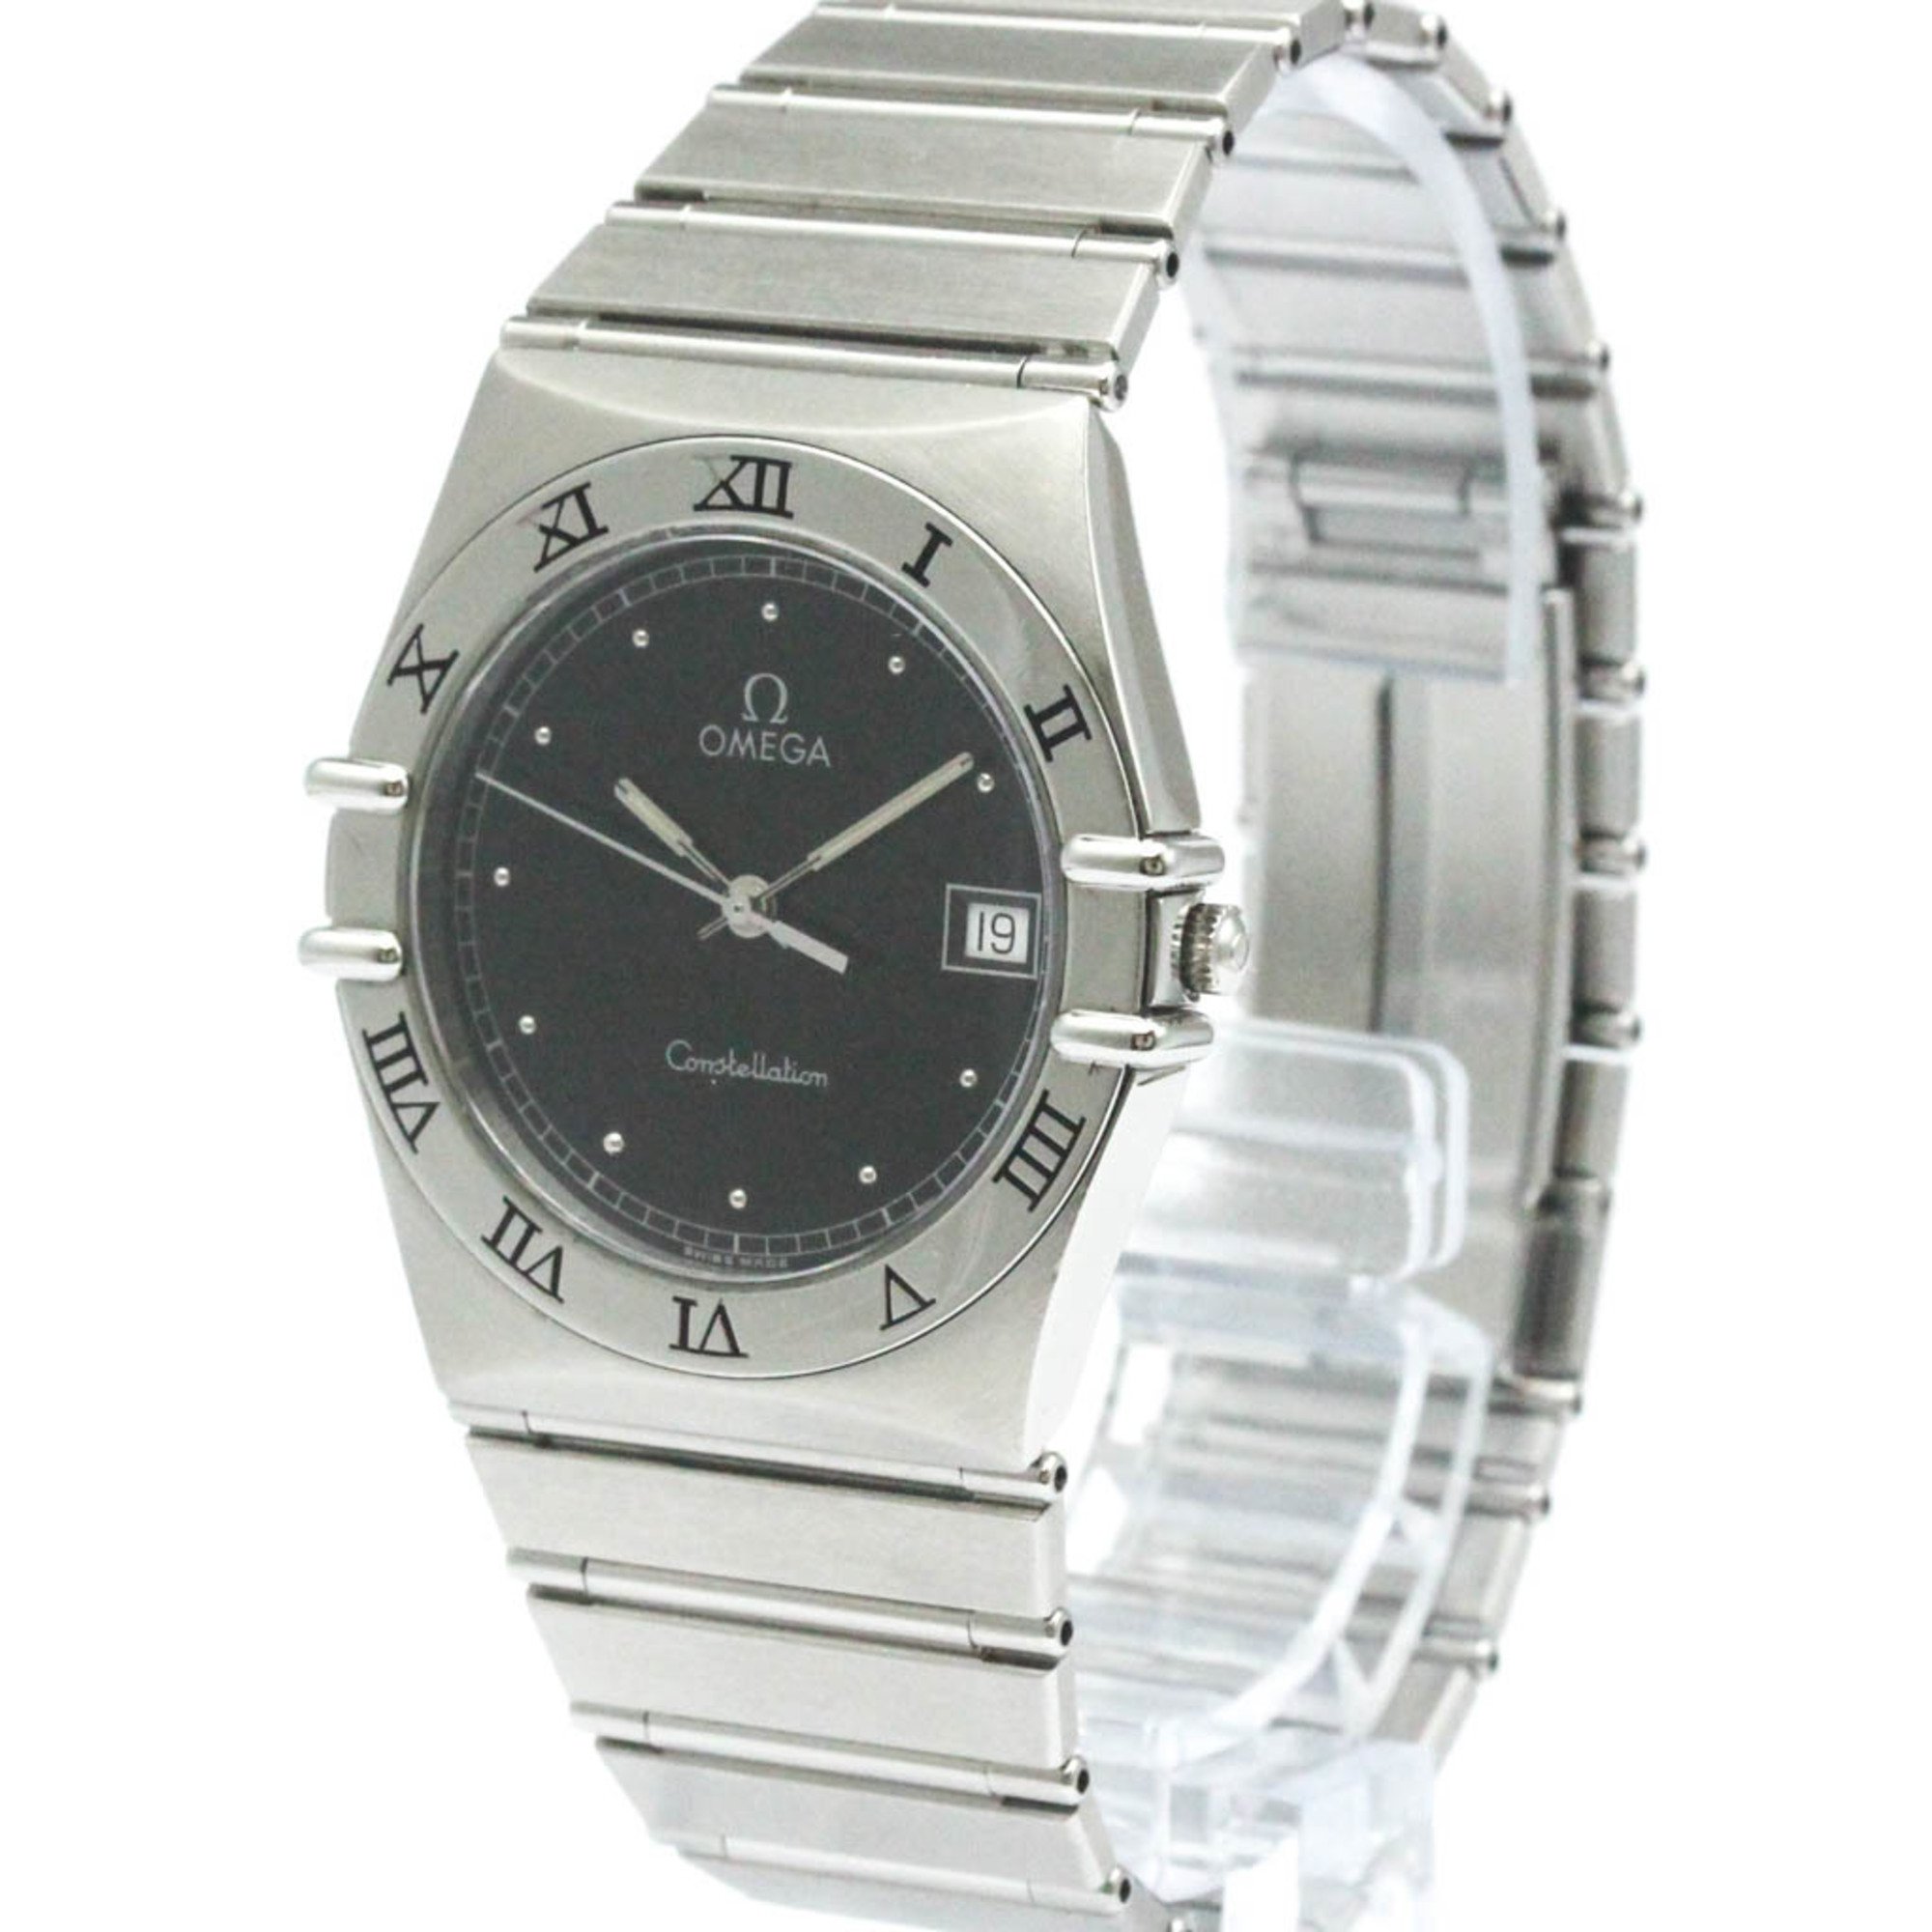 Polished OMEGA Constellation Stainless Steel Quartz Mens Watch 396.1070 BF565442